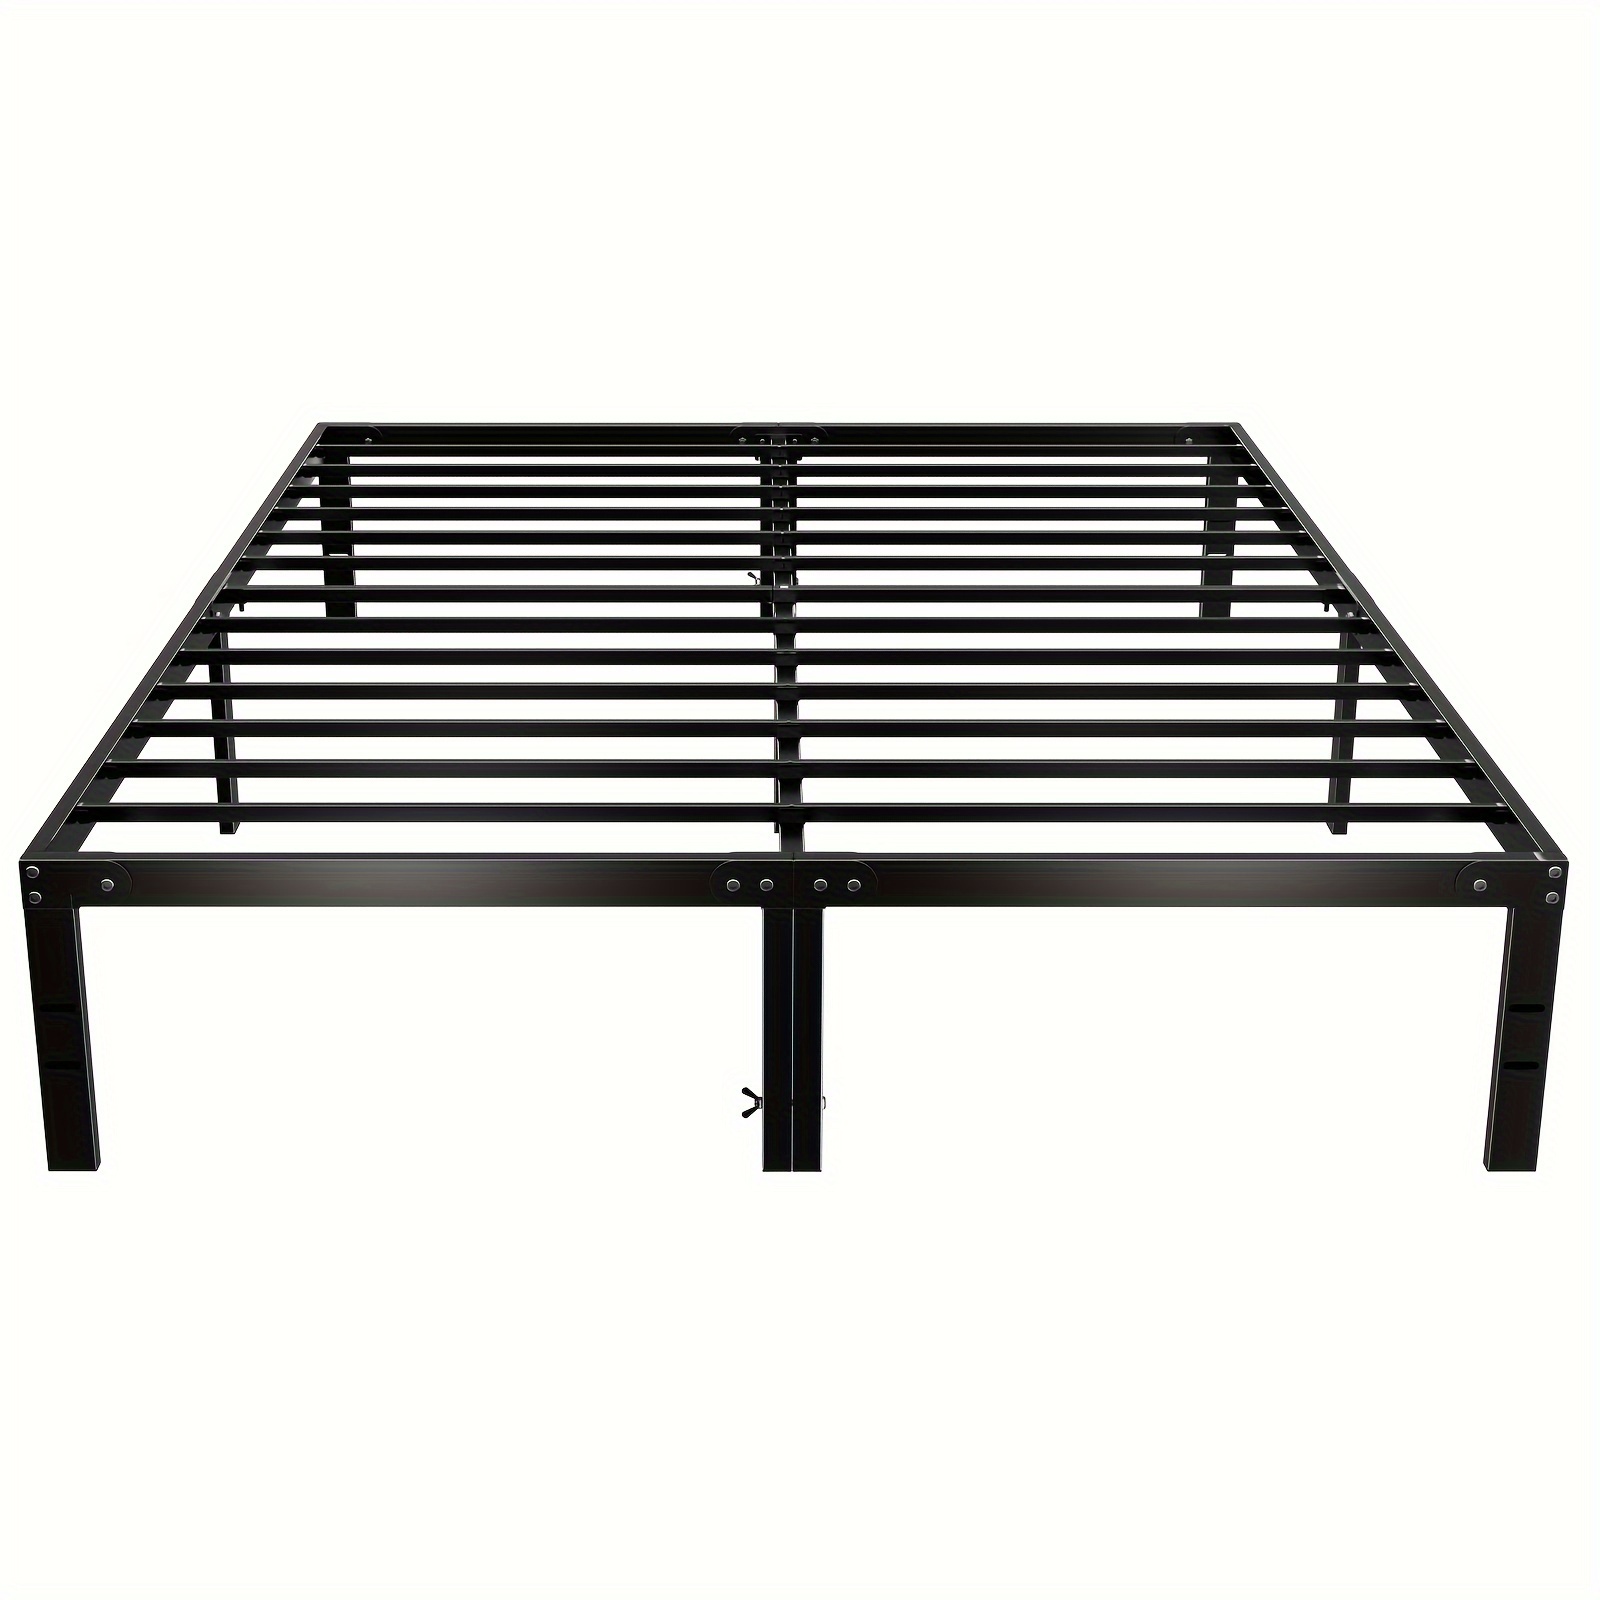 

Queen Size Bed Frame - Heavy Duty Metal Platform Bedroom Frames King Size With Storage Space, No Box Spring Needed, 14 Inches High, Sturdy Steel Slat Support, Black